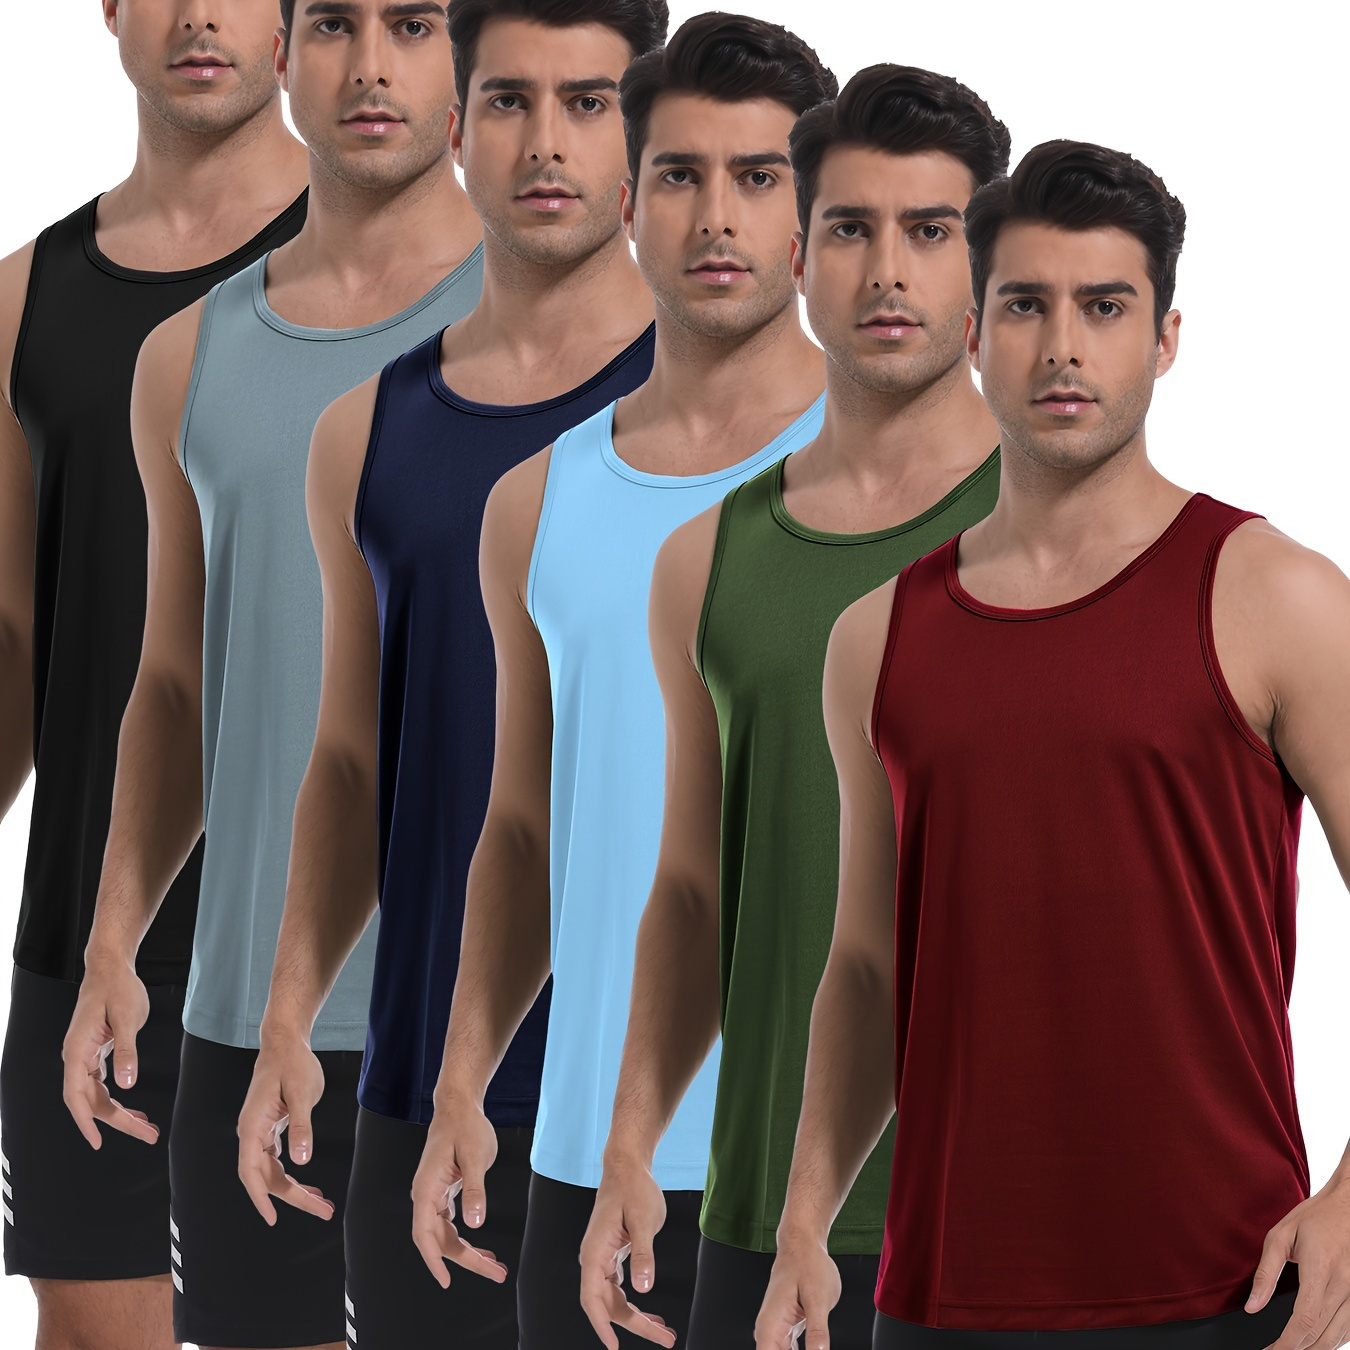 

6-pack Men's Athletic Tank Tops - Moisture-wicking Quick-dry Shirts For Outdoors & Sports